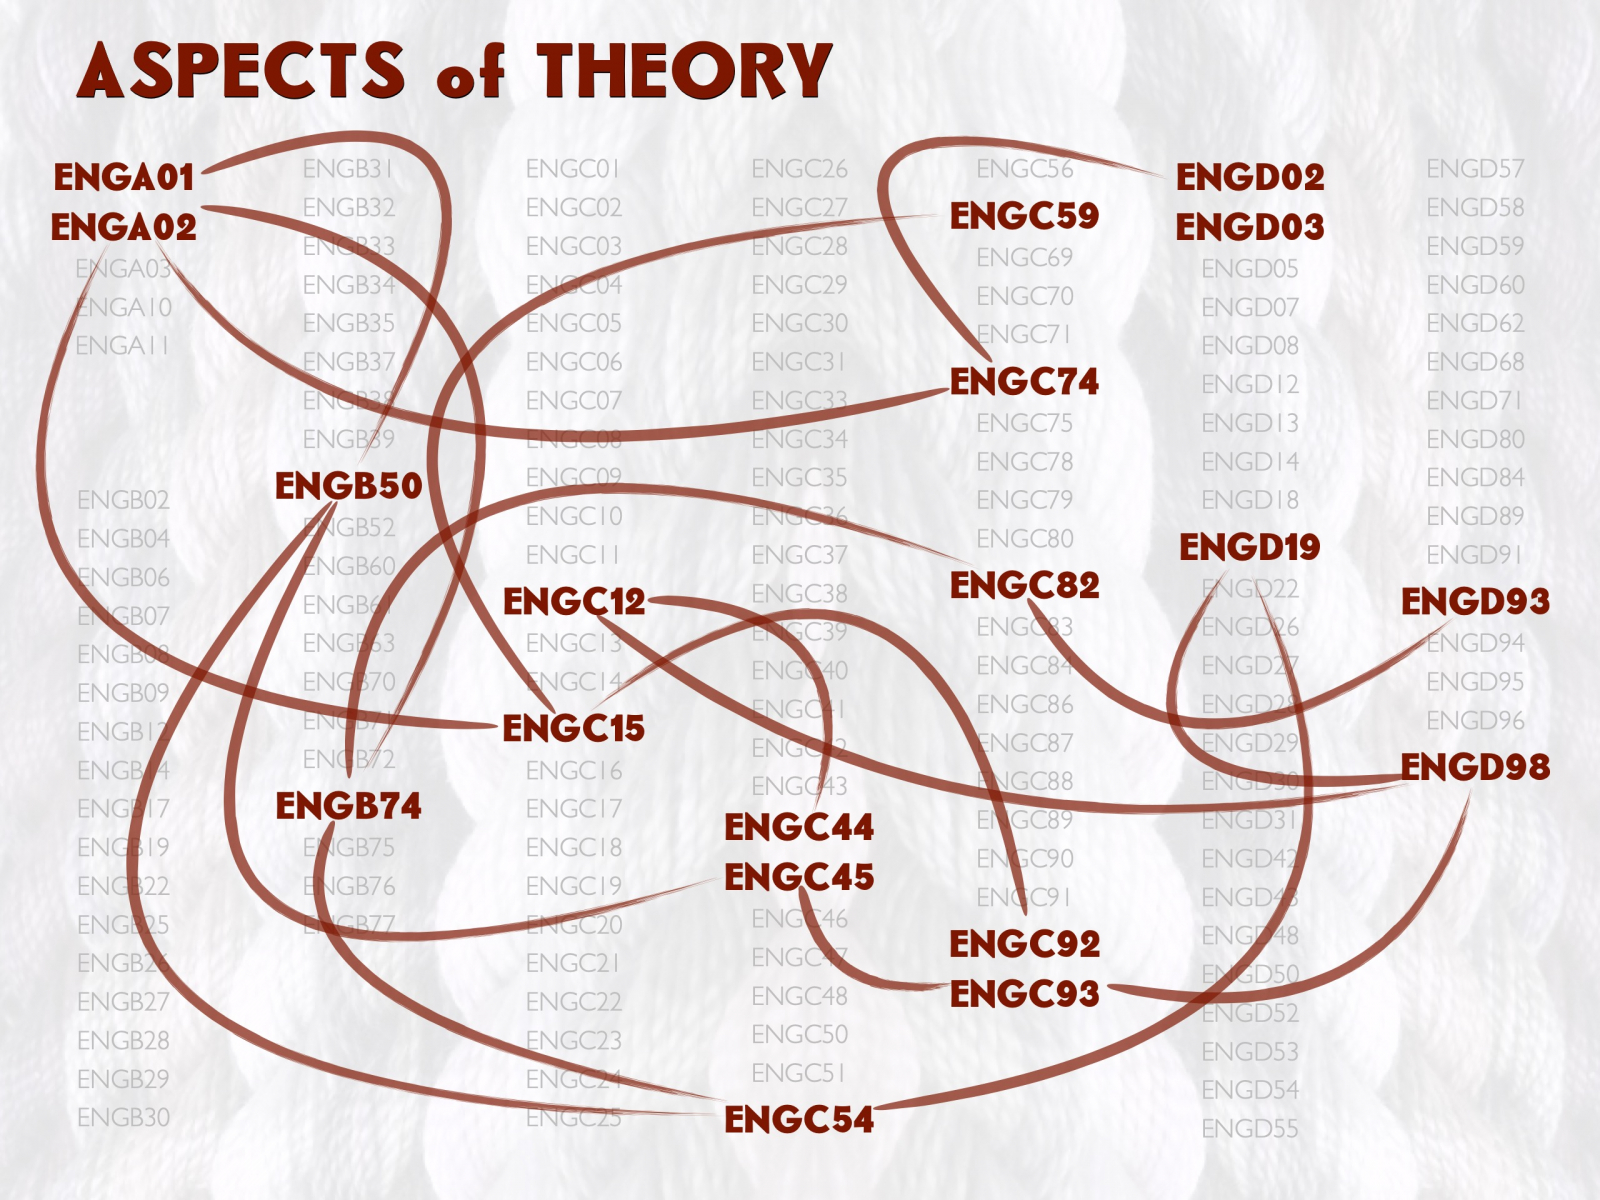 Aspects of Theory road map